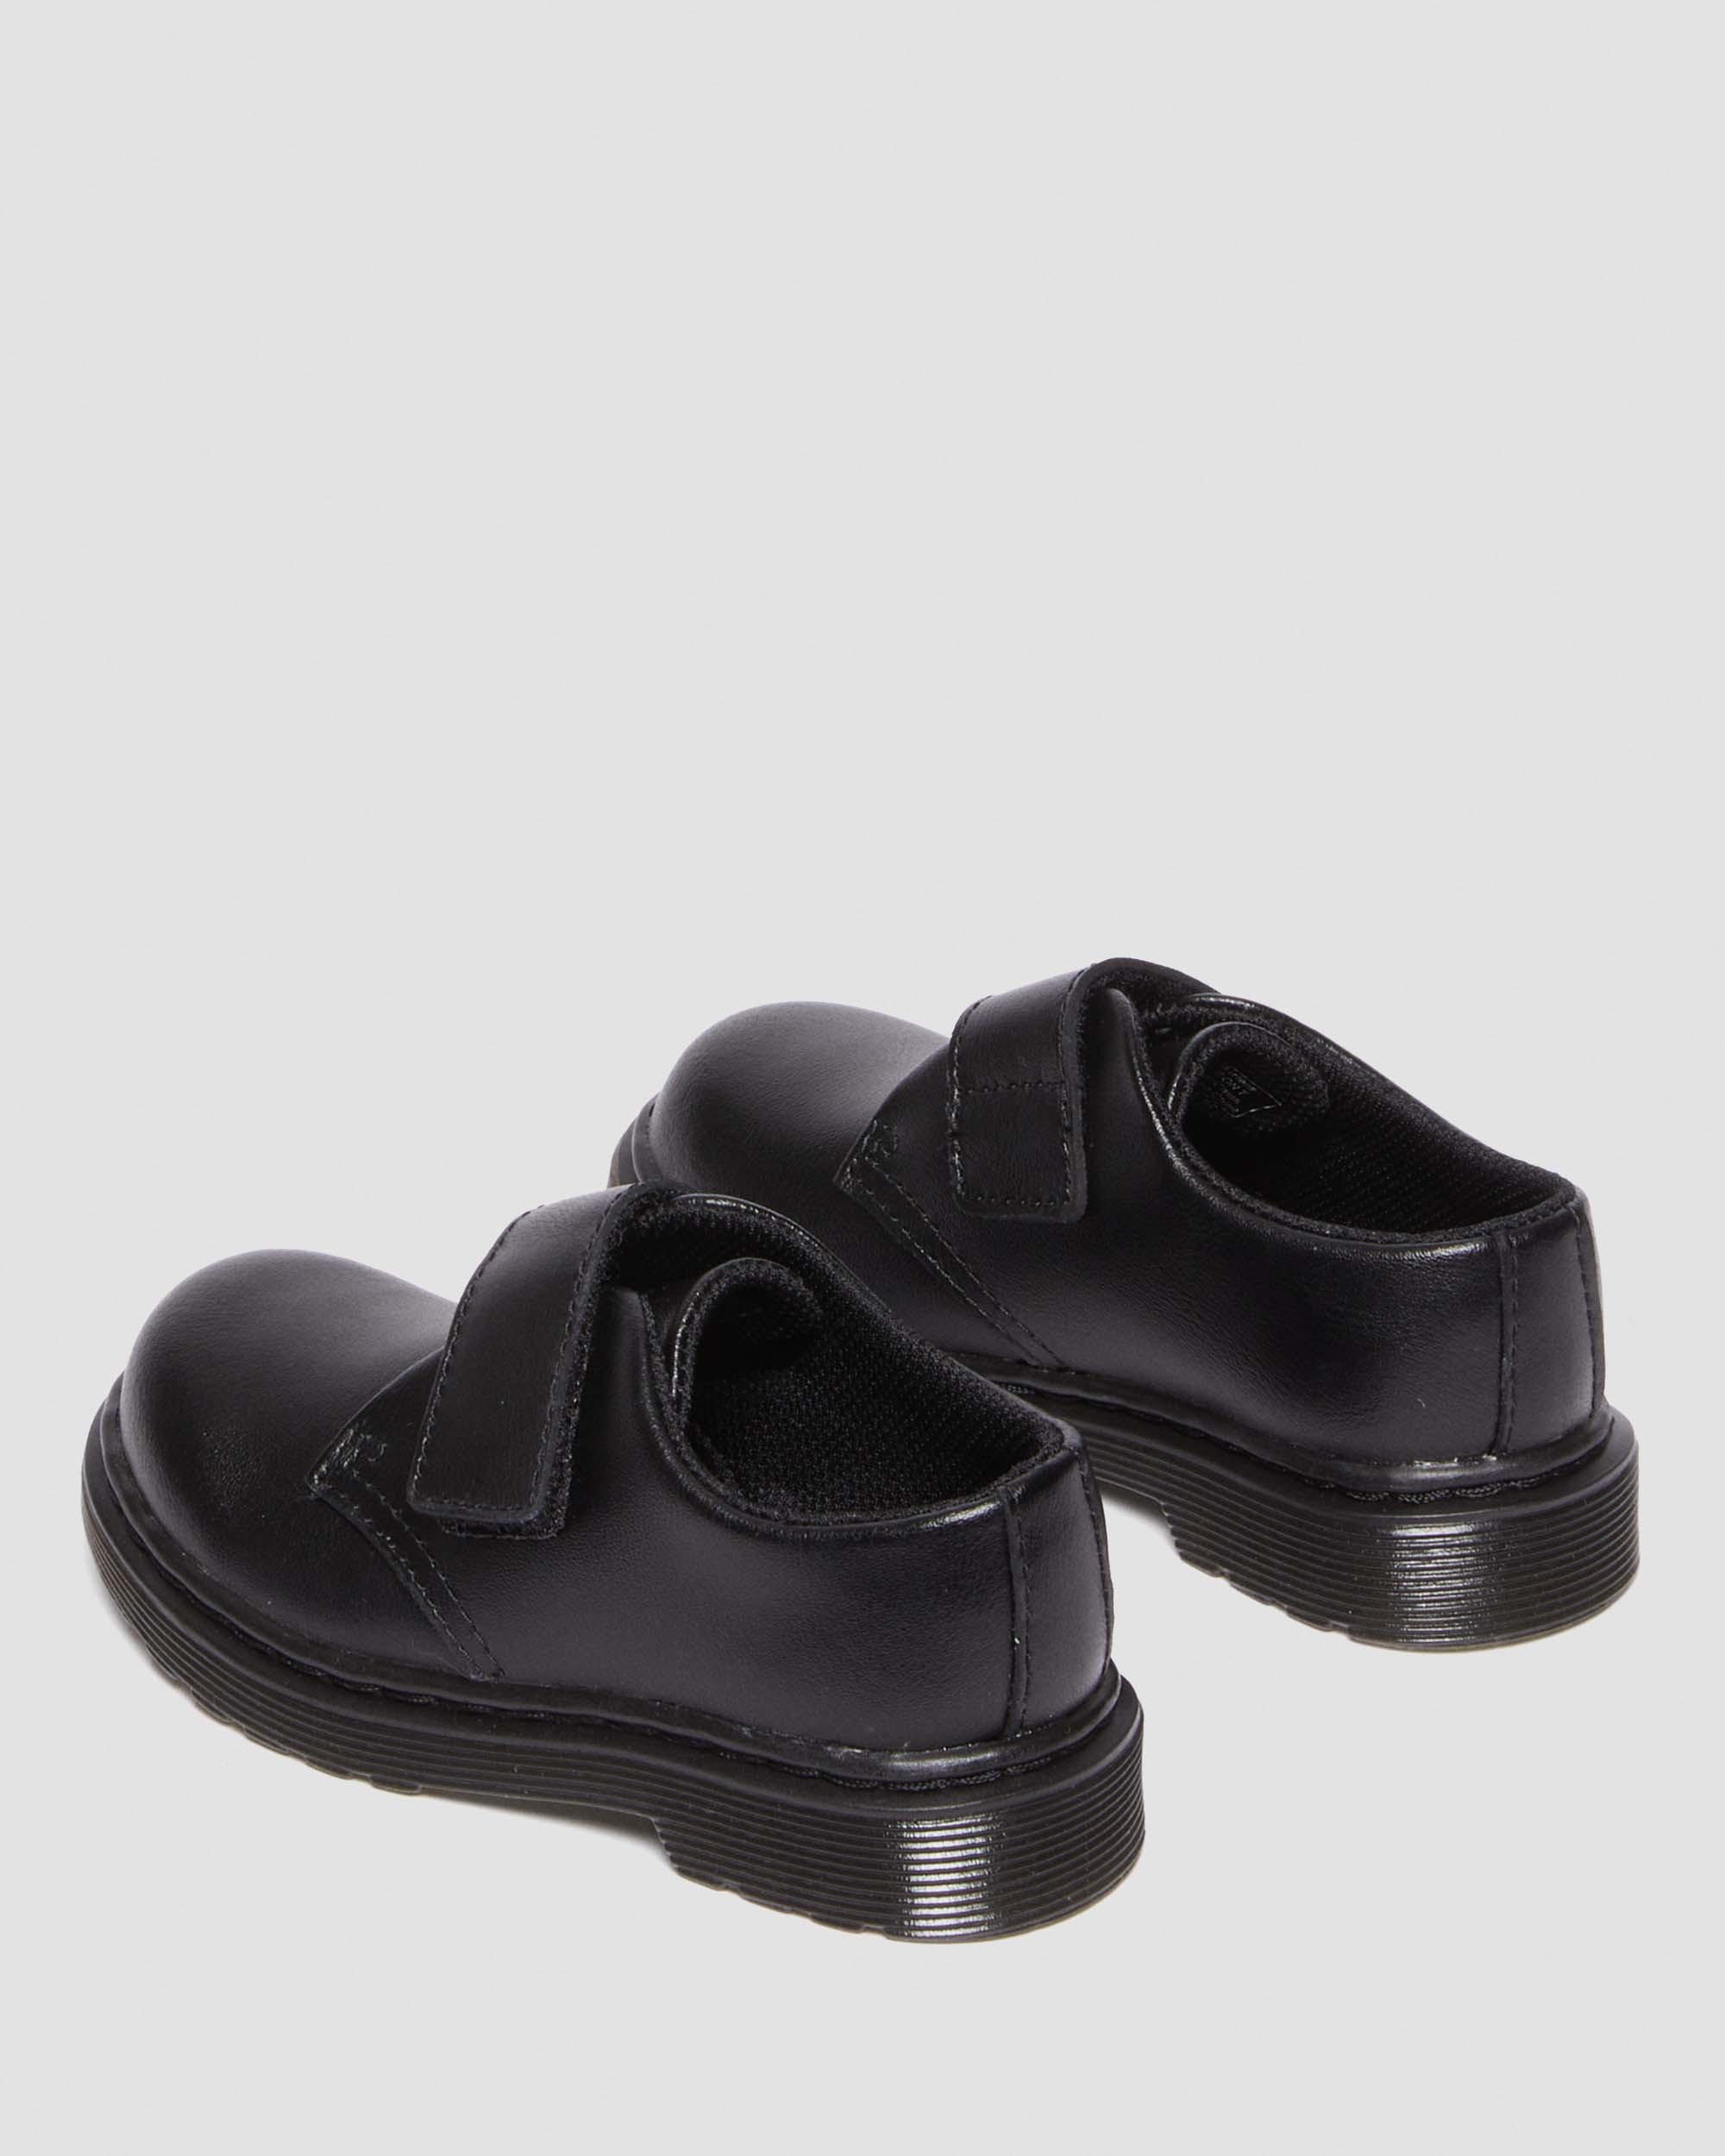 Toddler Kamron Leather Strap Velcro Oxford Shoes in Black